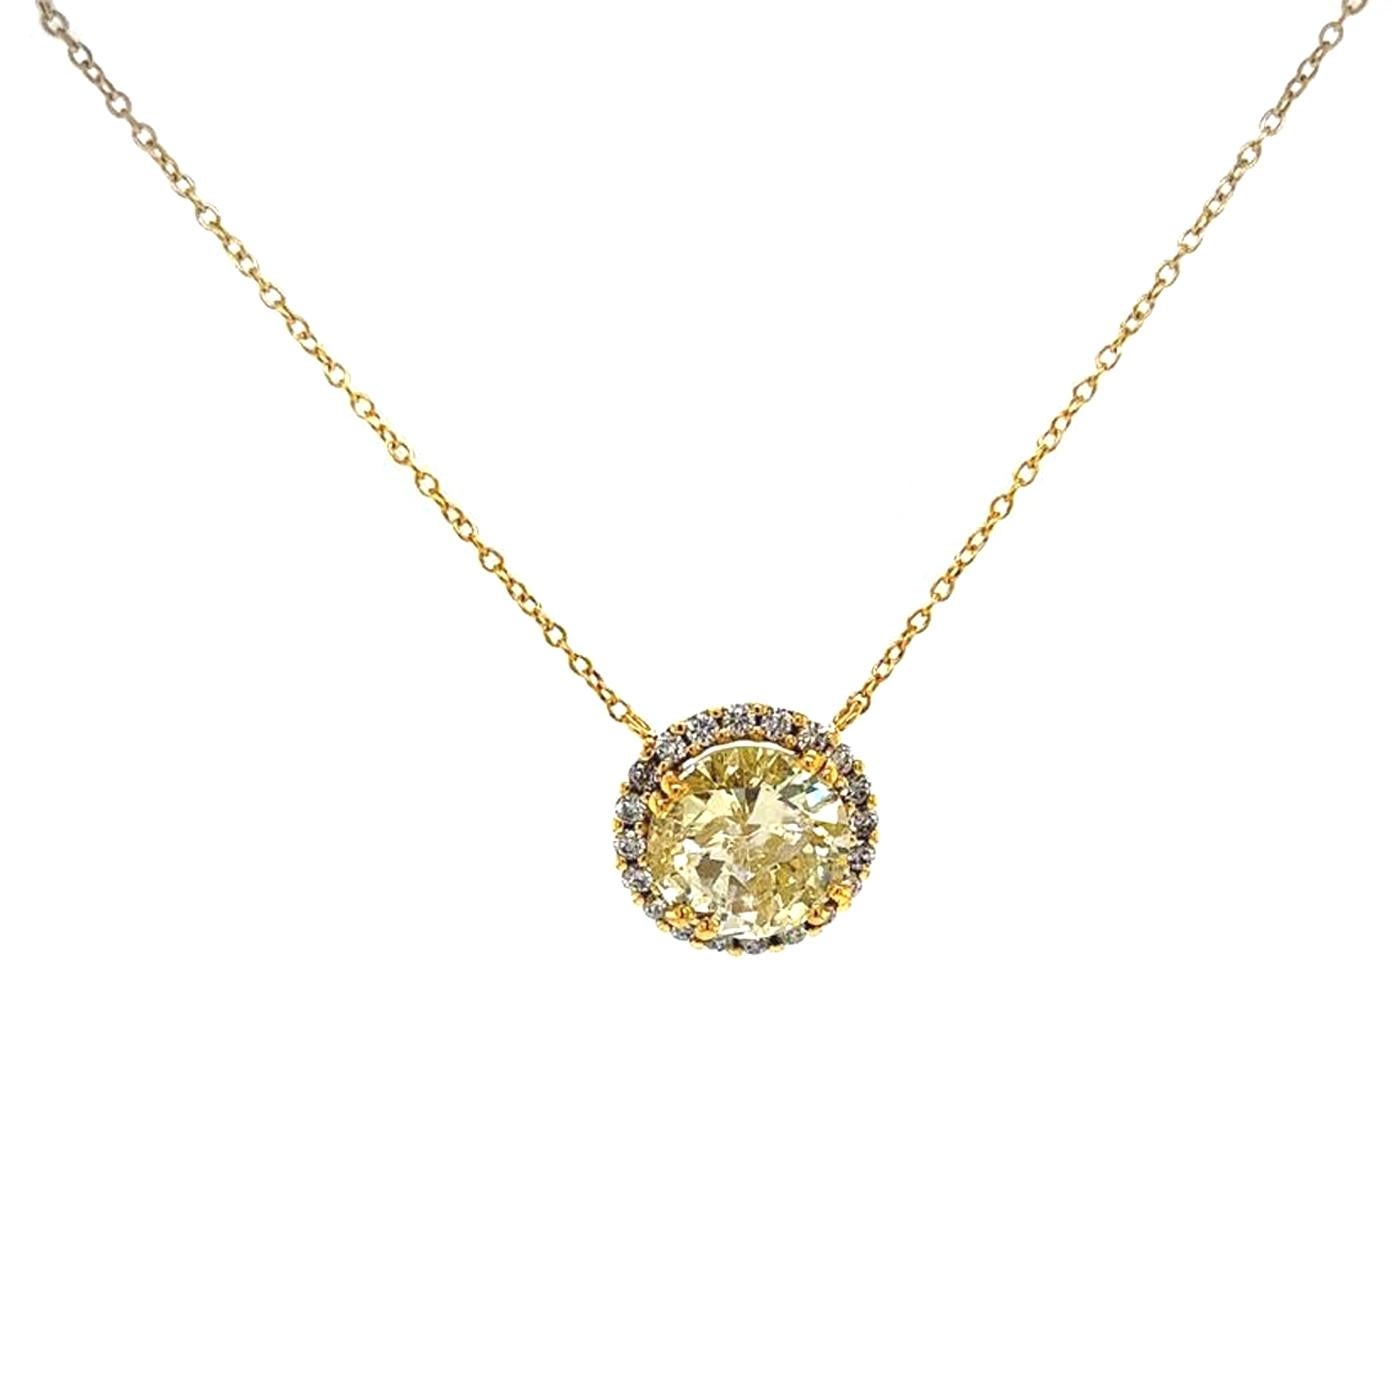 Modernist 3.15 Carat Natural Fancy Yellow Round Diamond 18K Gold Pendant Halo Necklace For Sale